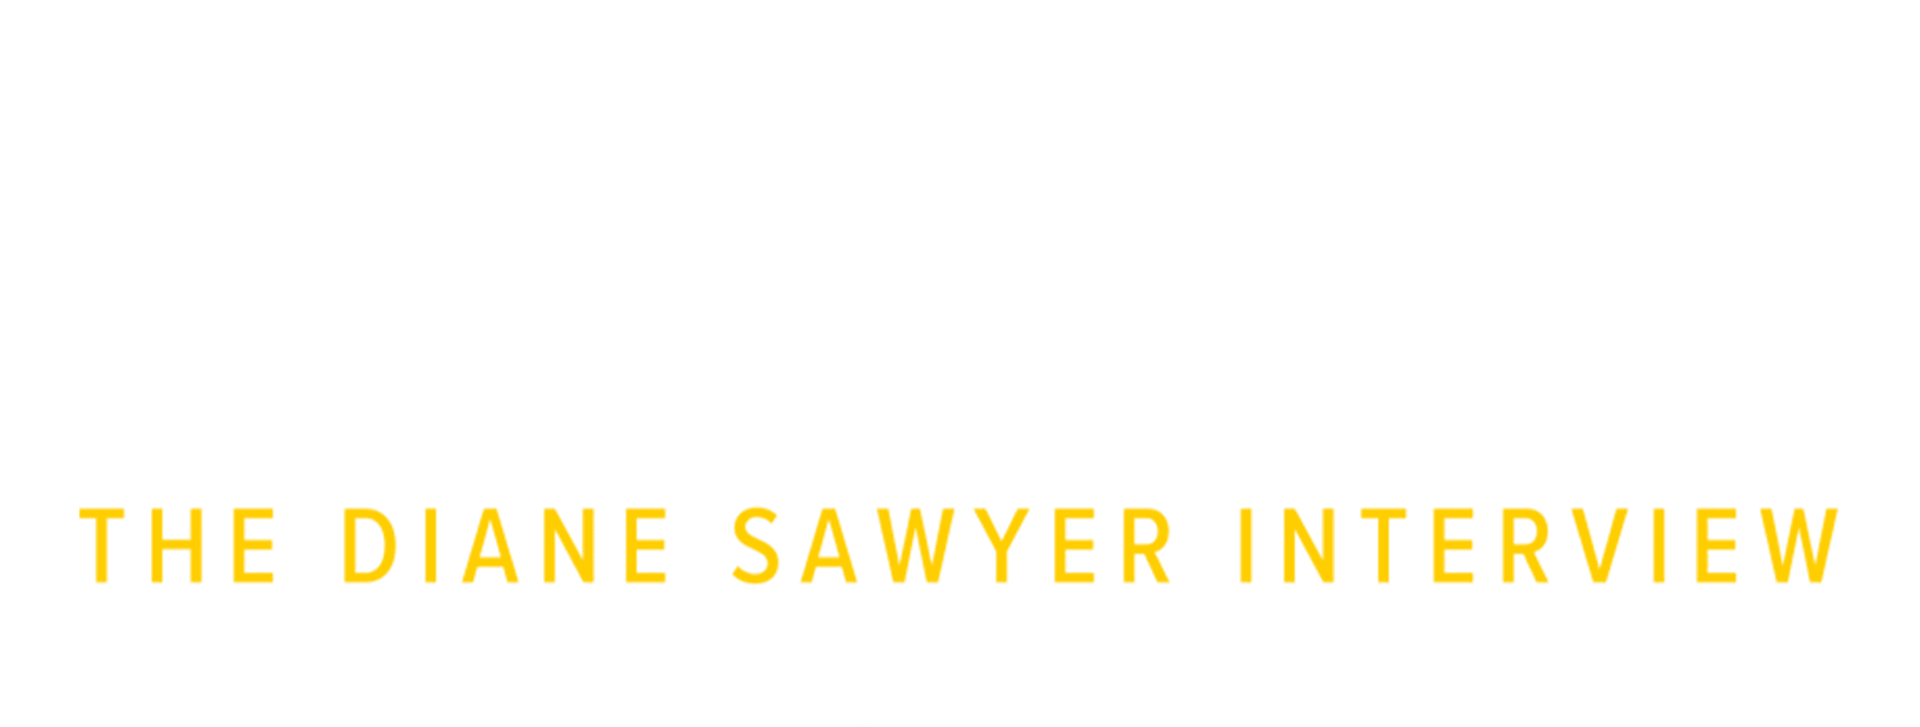 Jeremy Renner: The Diane Sawyer Interview - A Story of Terror, Survival and Triumph logo